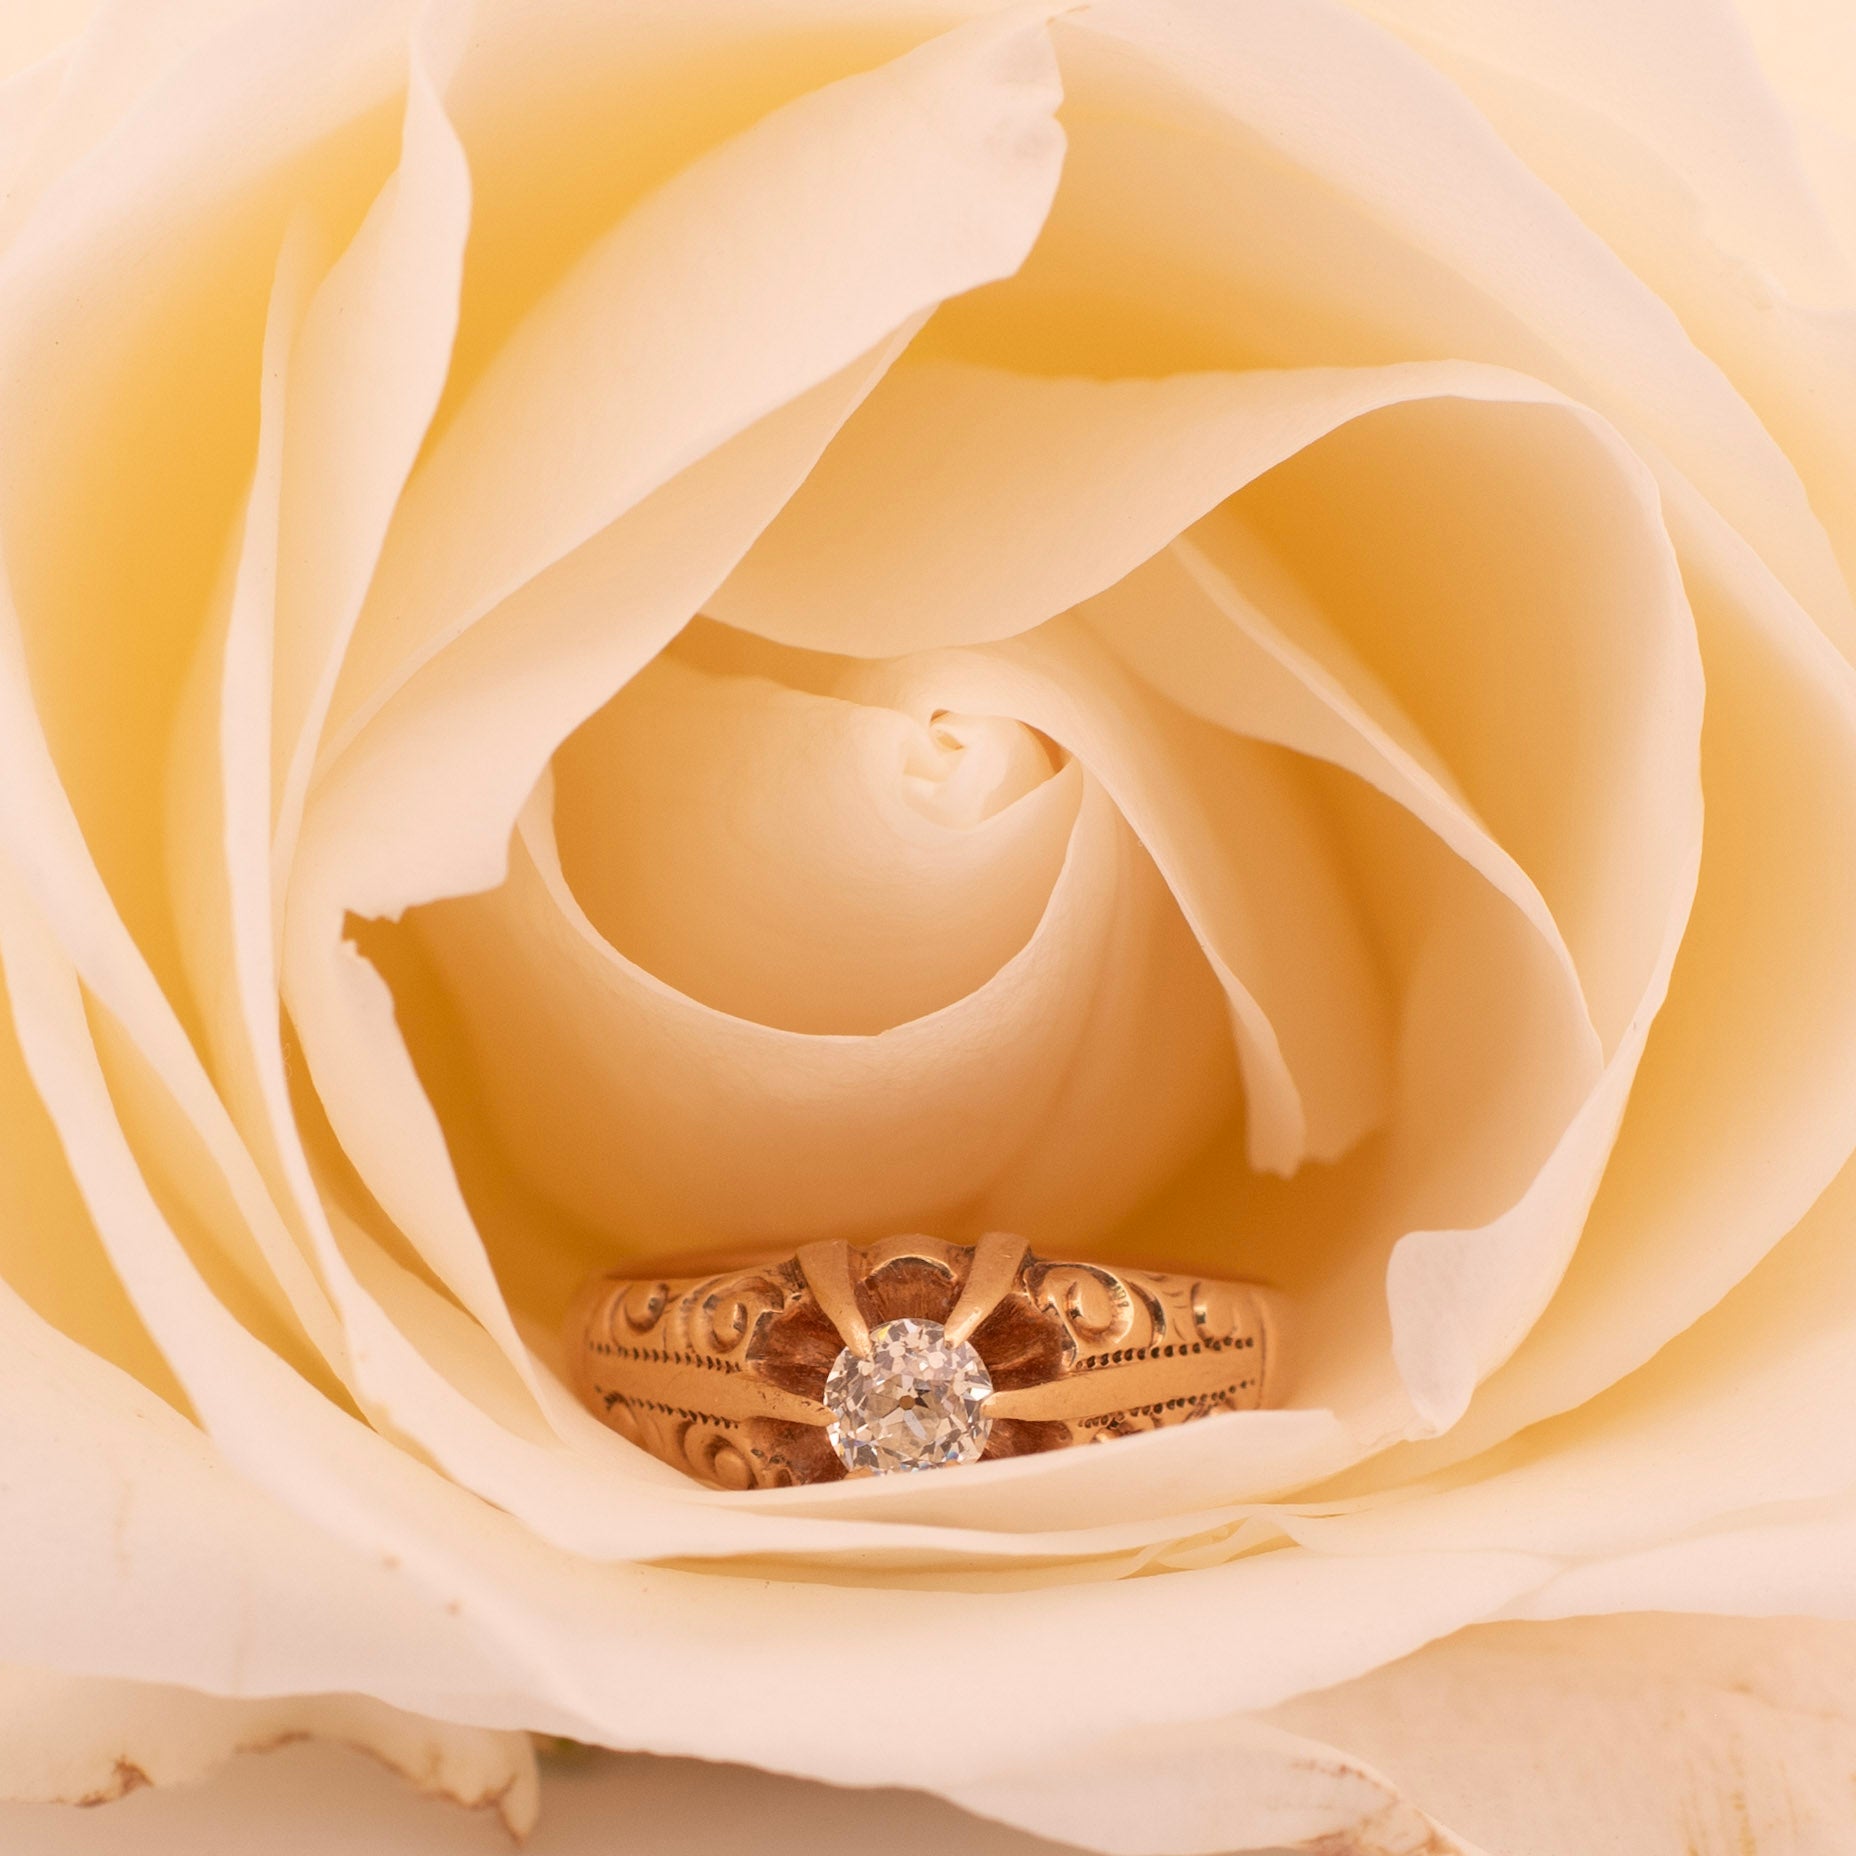 Experience the elegance of the Victorian era with this stunning classic-style ring. Skillfully crafted in 14K yellow gold, the tapered shanks showcase intricate flowing scroll details, lending an artistic flair to the piece. At the heart of it all,